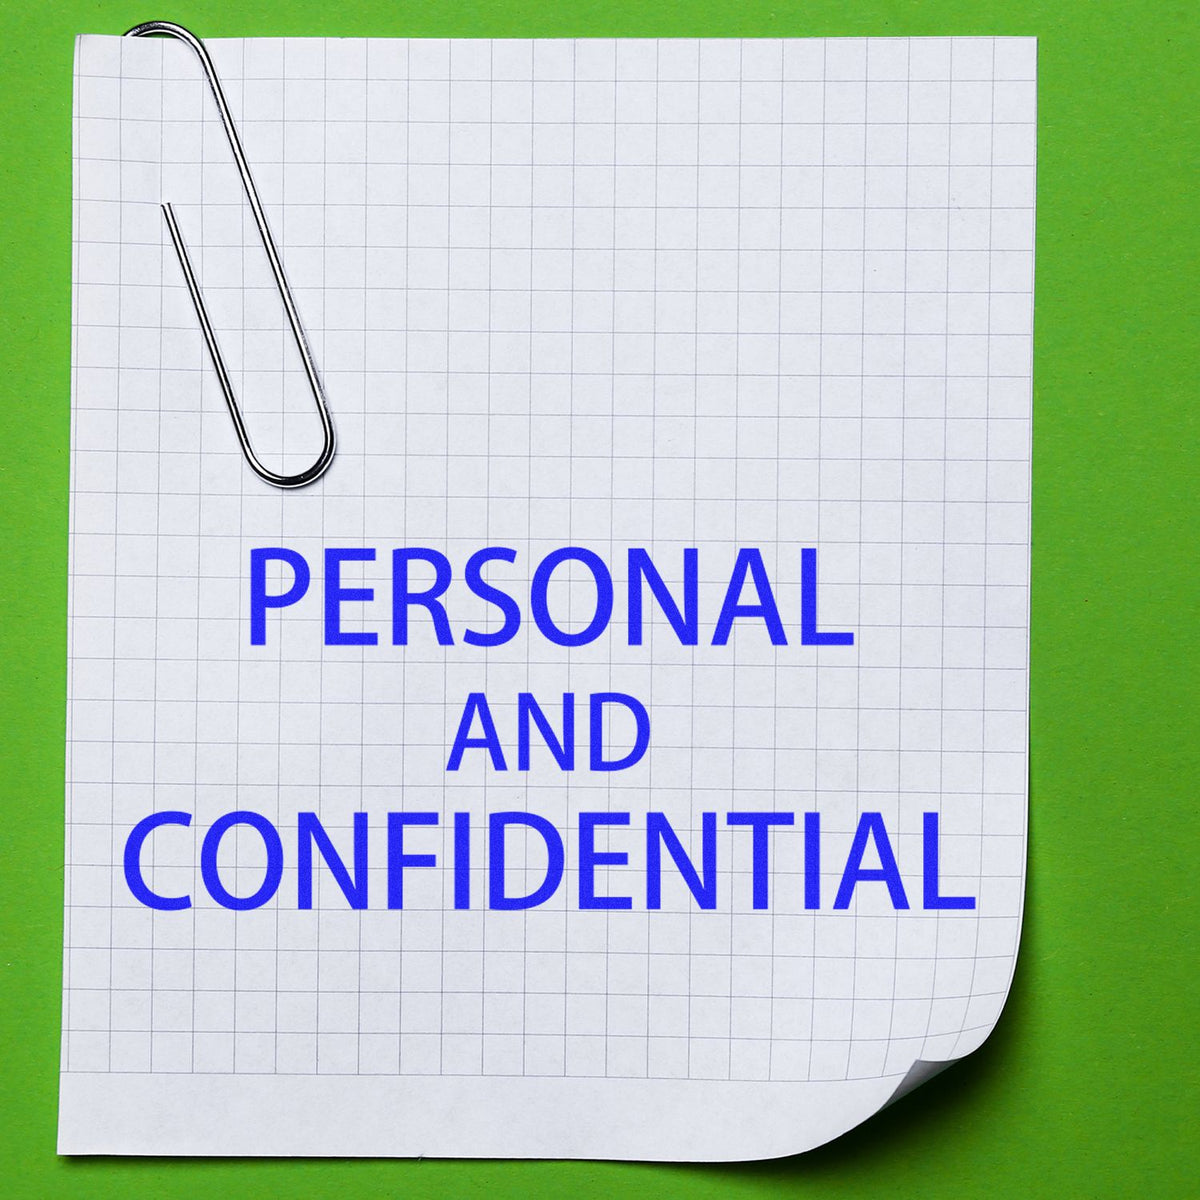 Large Personal Confidential Rubber Stamp In Use Photo